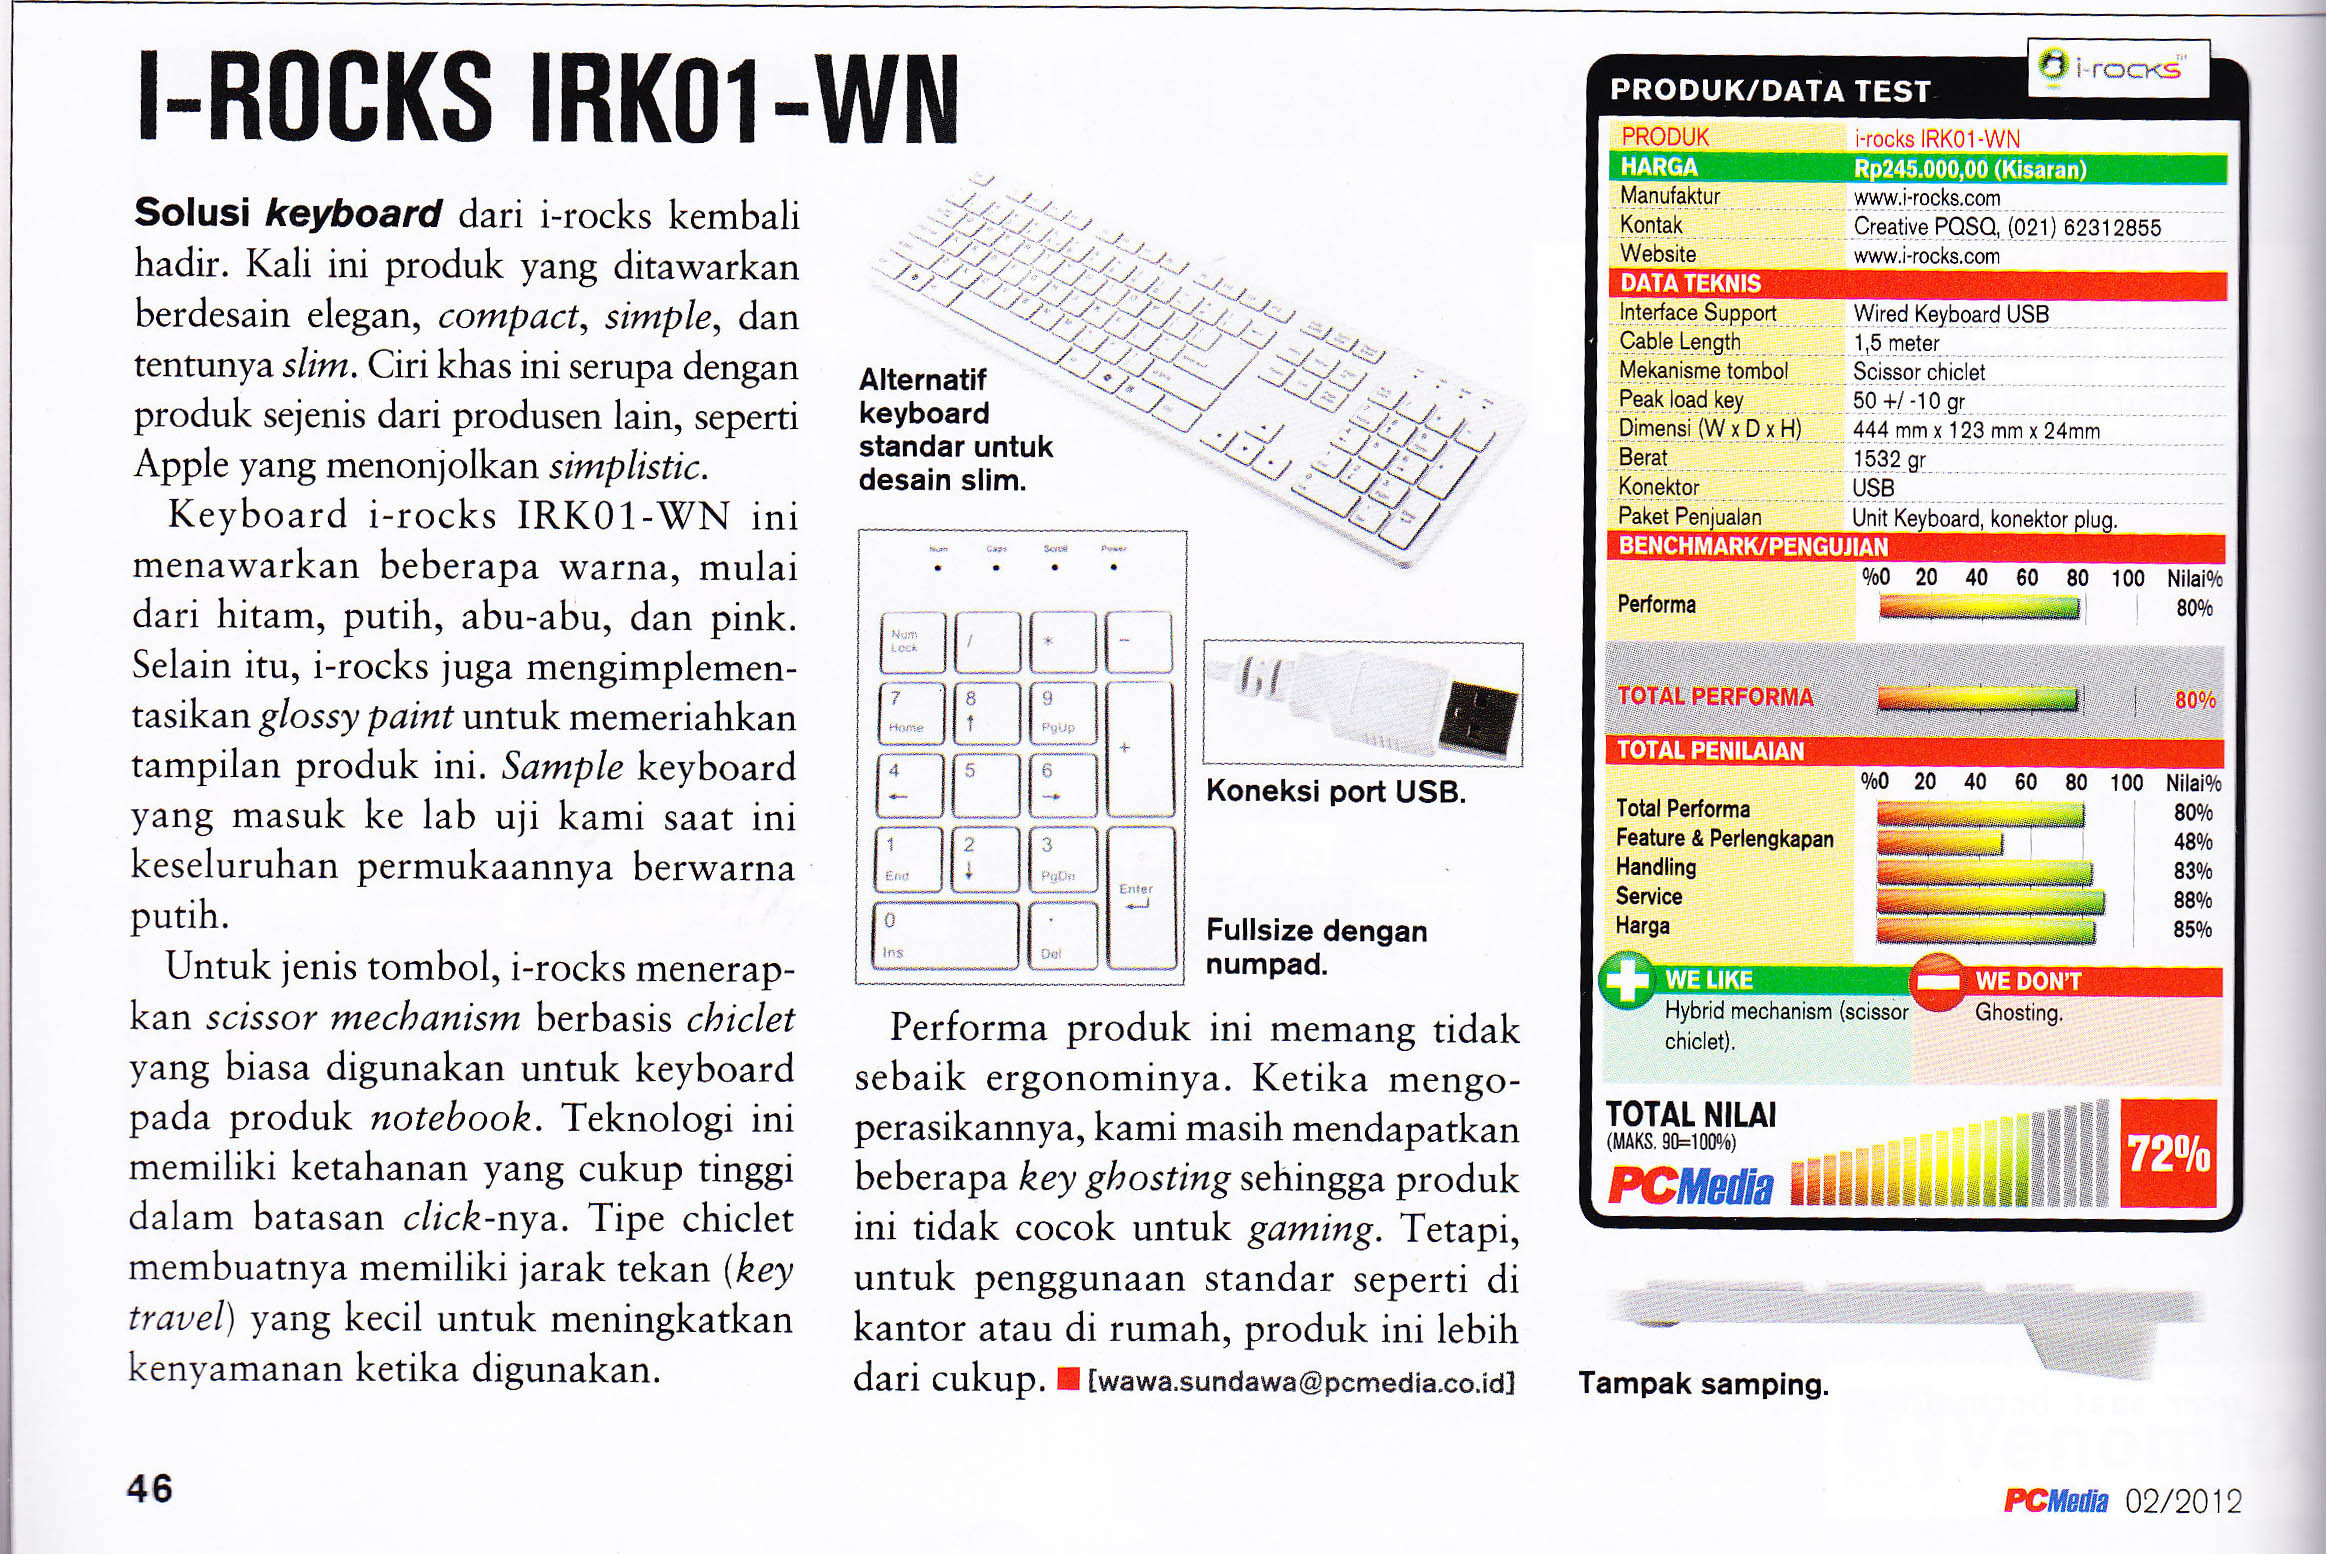 review-irk-01-wn-wh-pc-media-feb-12-hal